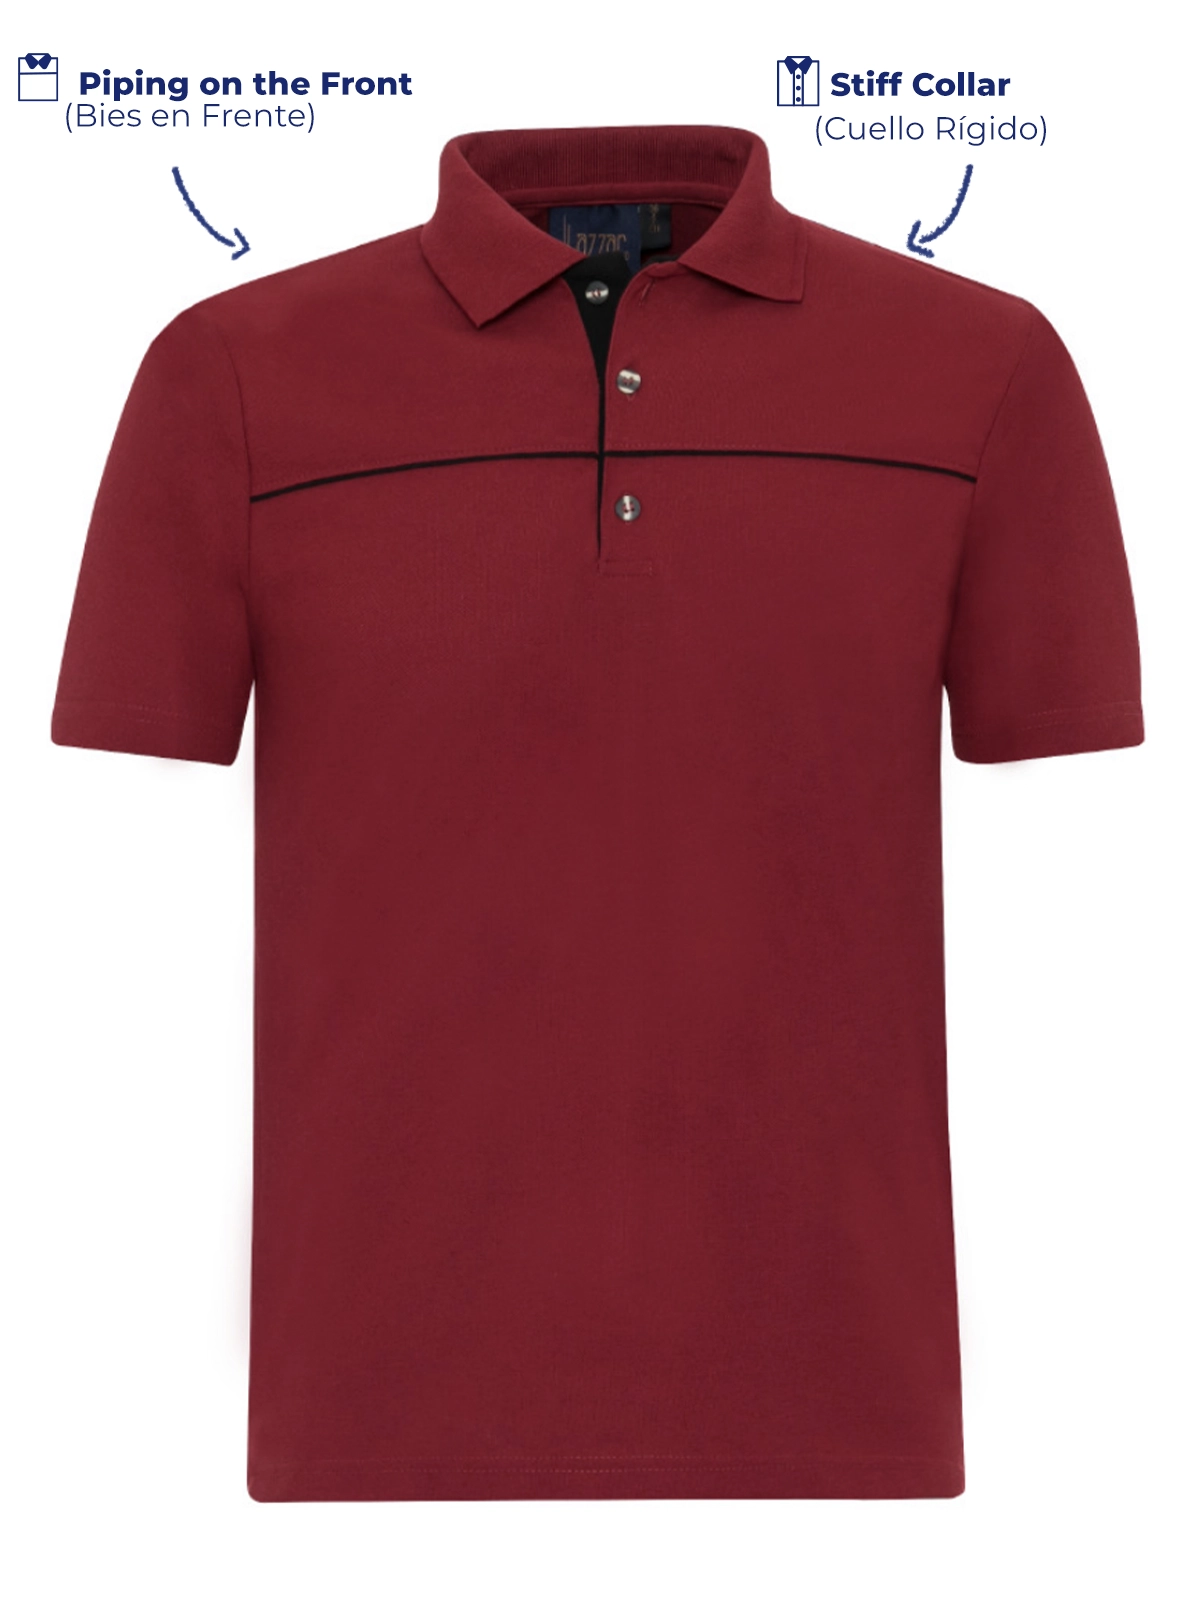 Polo Work Shirts in Texas, Lazzar embroidered logo P506